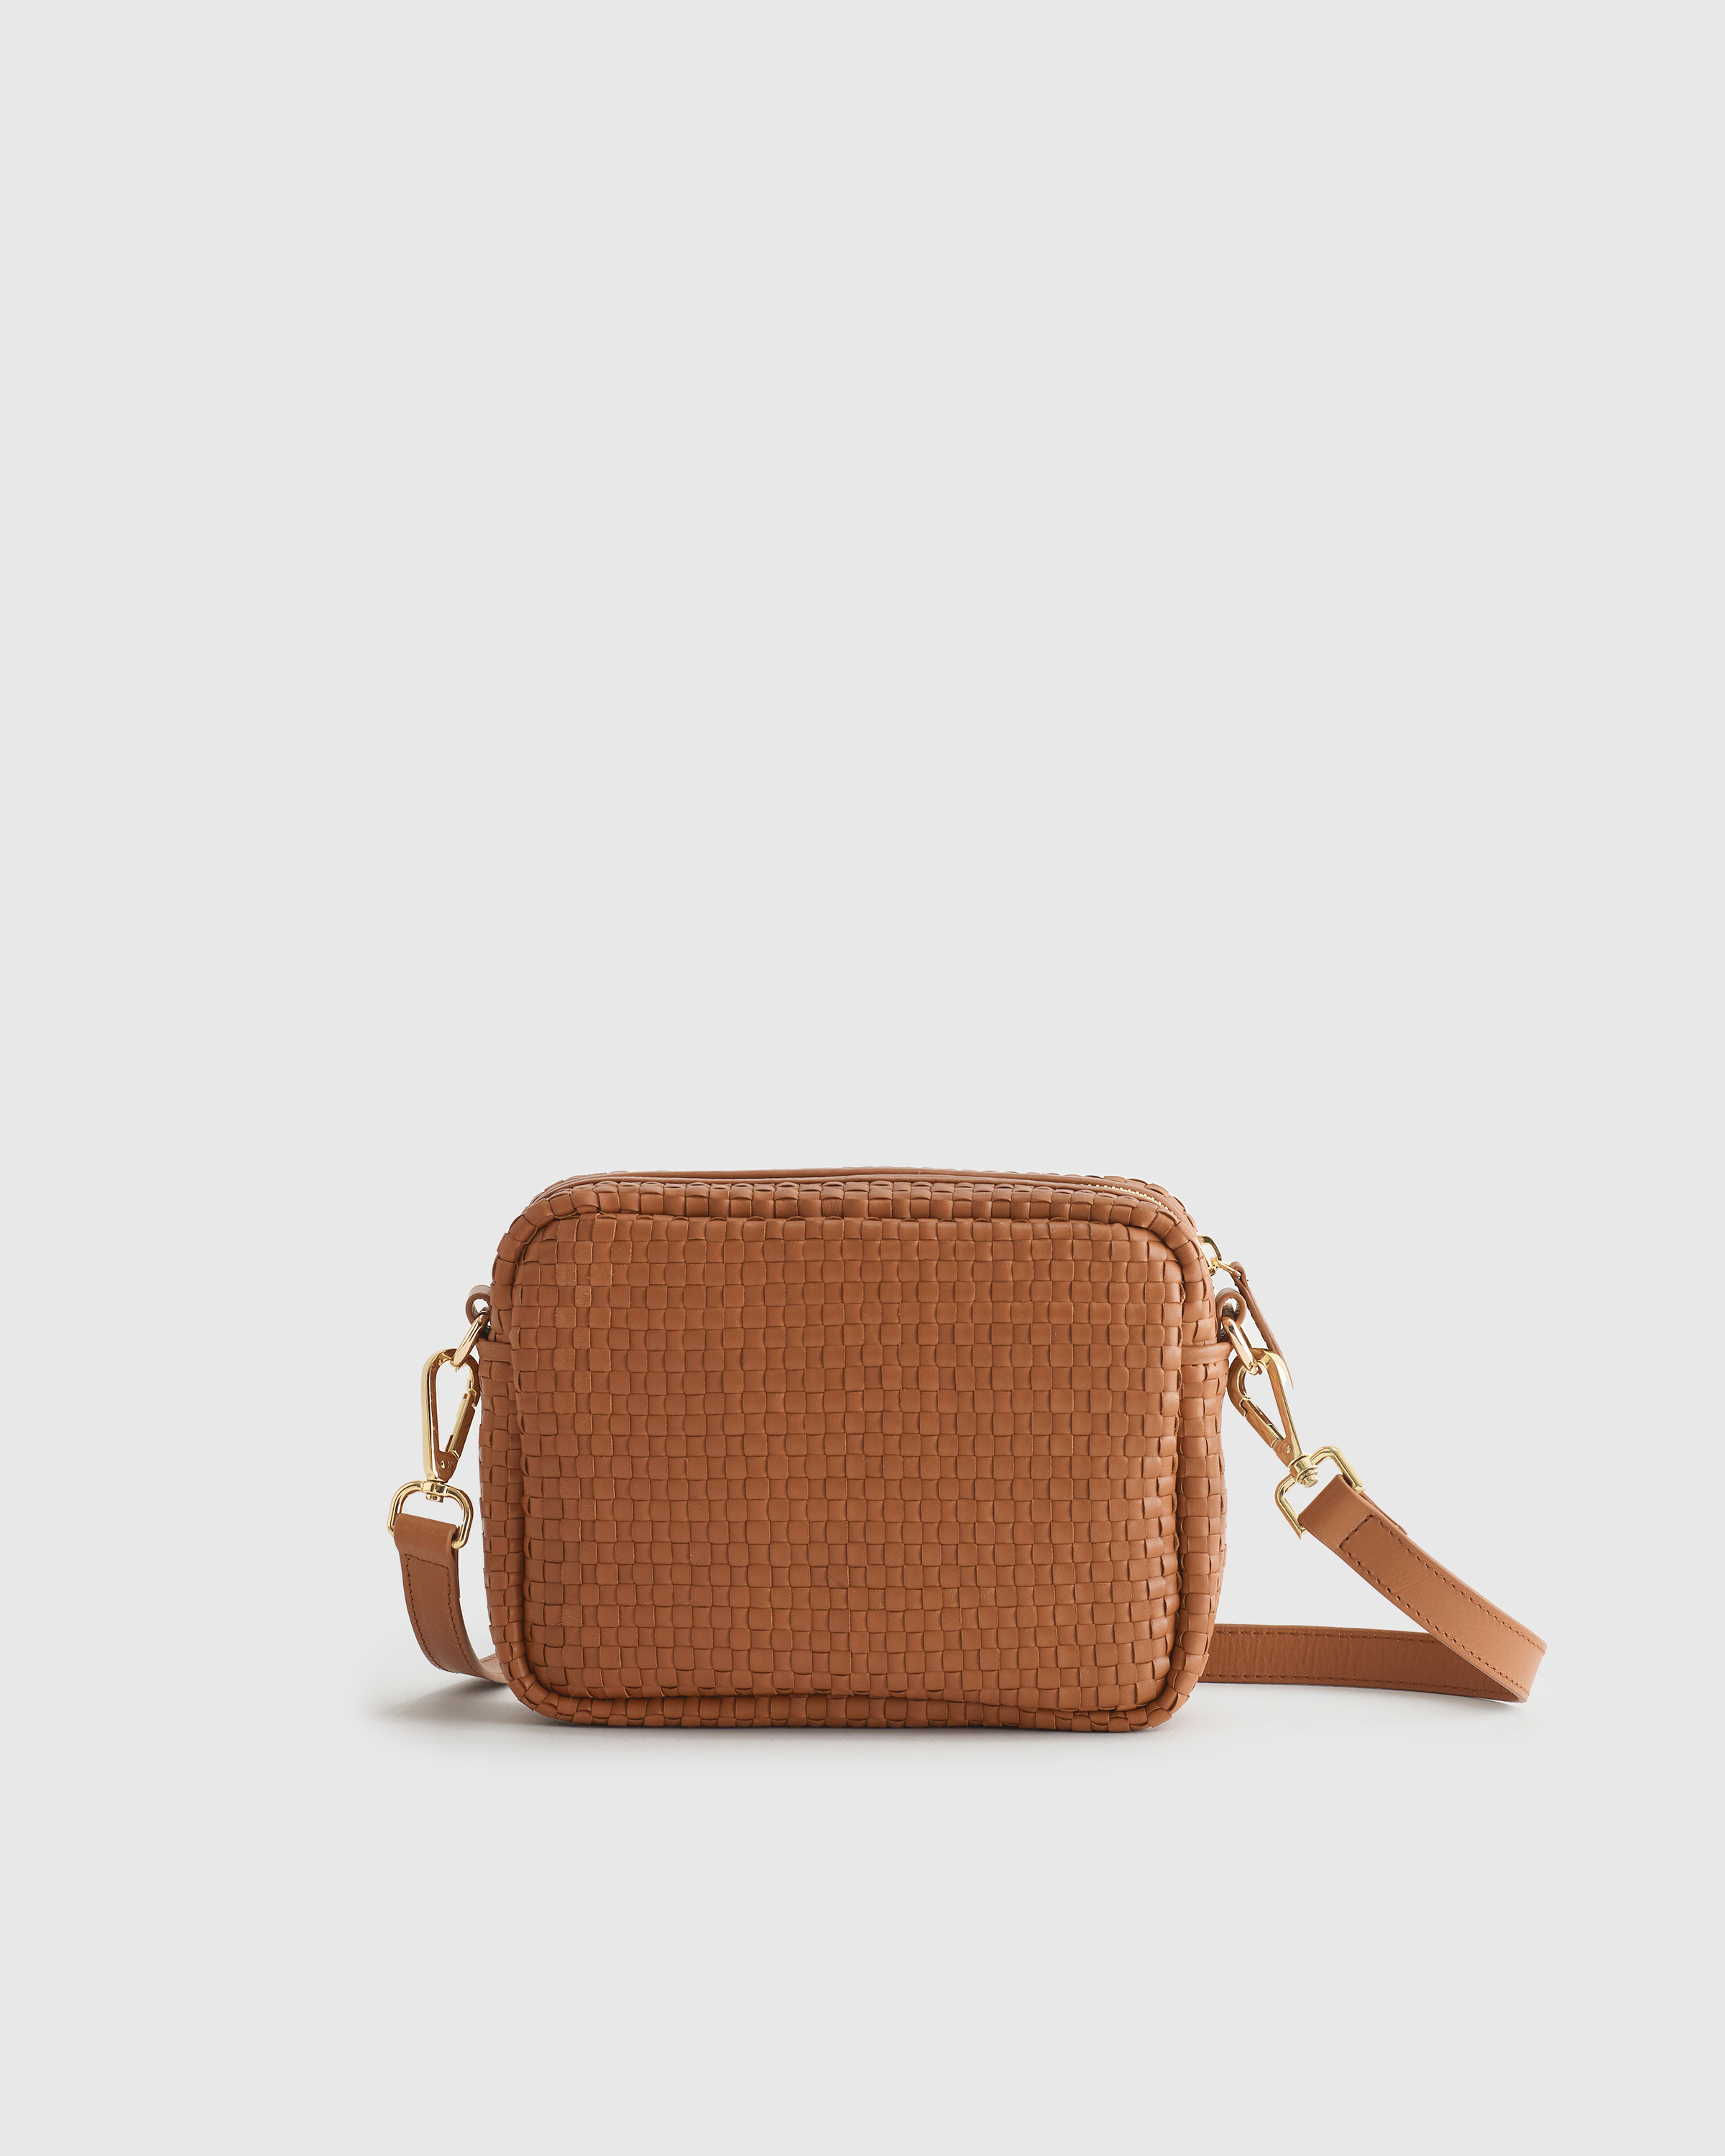 Crossbody Bags for Women, Vegan Leather Dome India